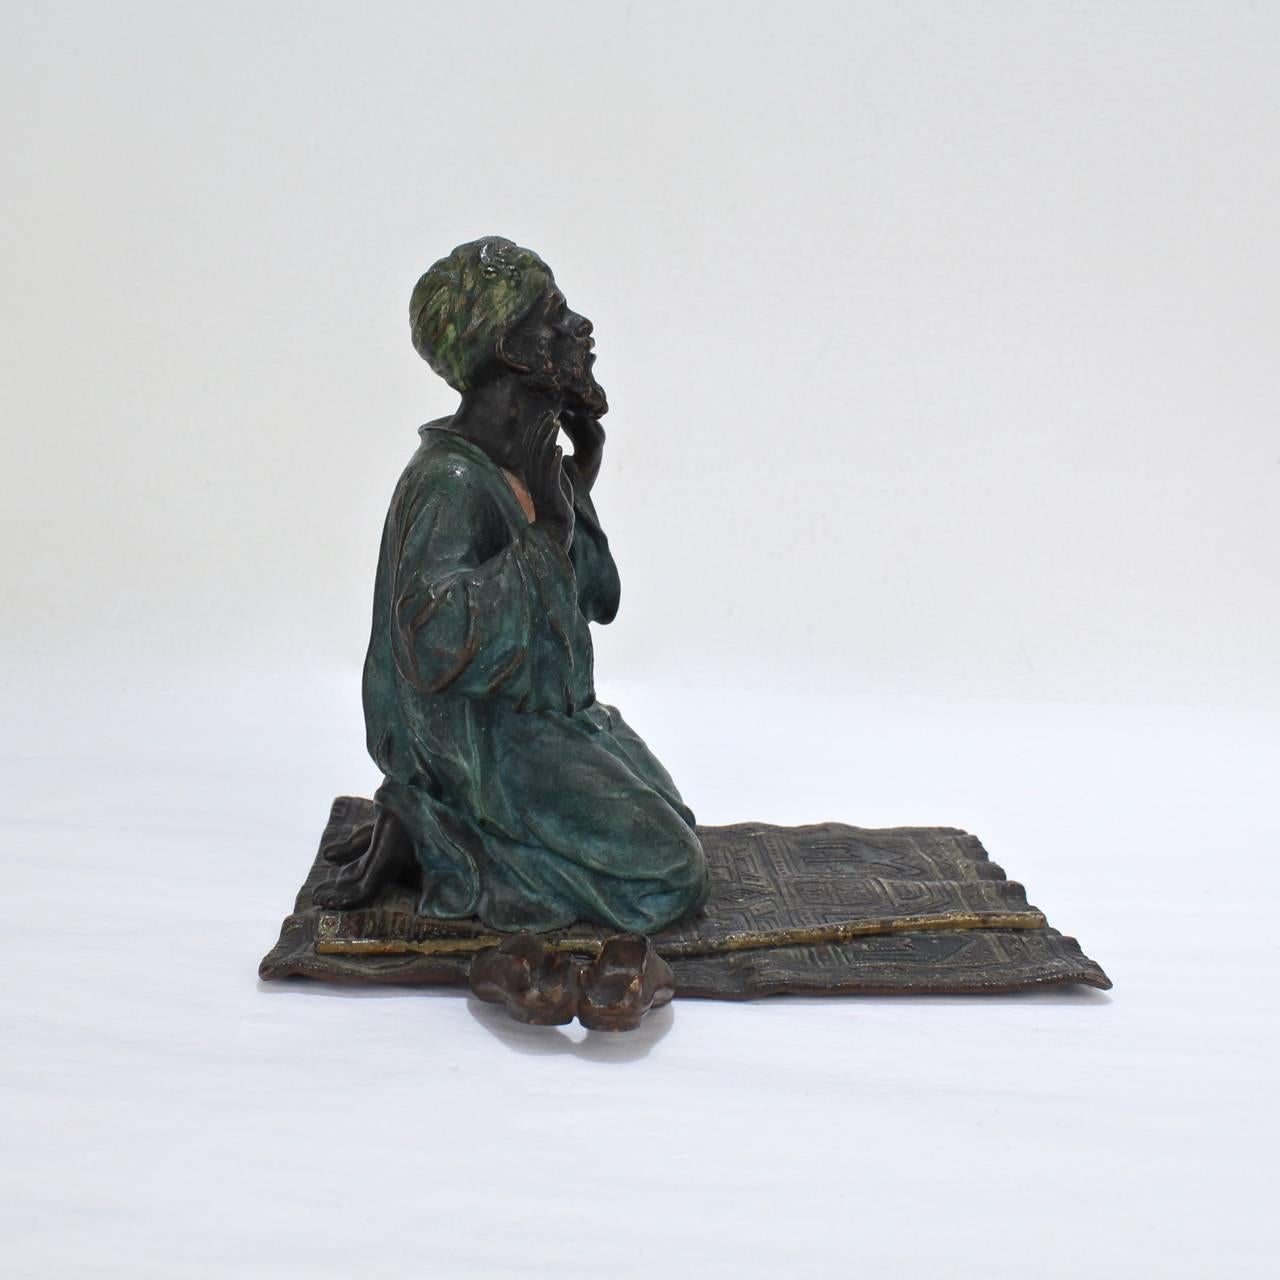 Cold-Painted Cold Painted Orientalist Vienna Bronze of an Arab Man in Prayer by Franz Bergman